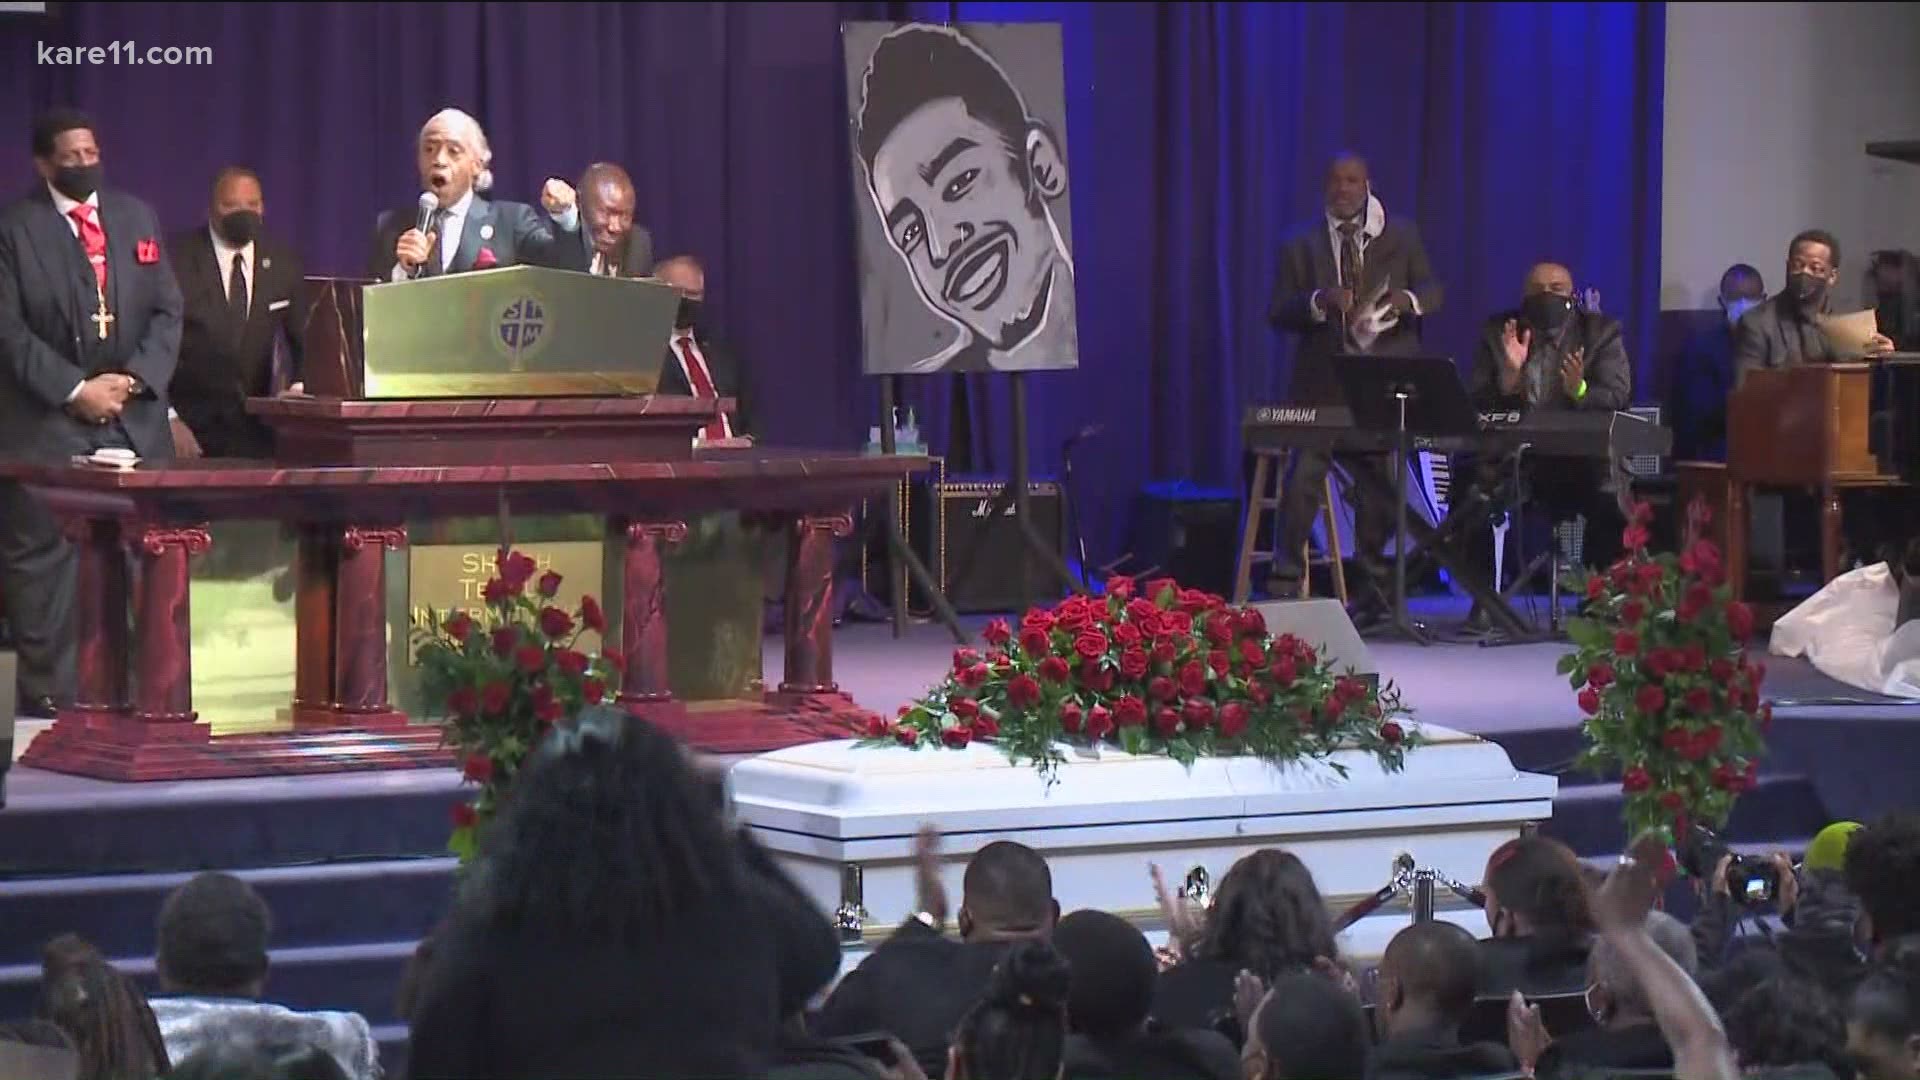 Daunte Wright, whose name has become familiar across the world in recent days, was honored by national civil rights leaders and lawmakers at his funeral.